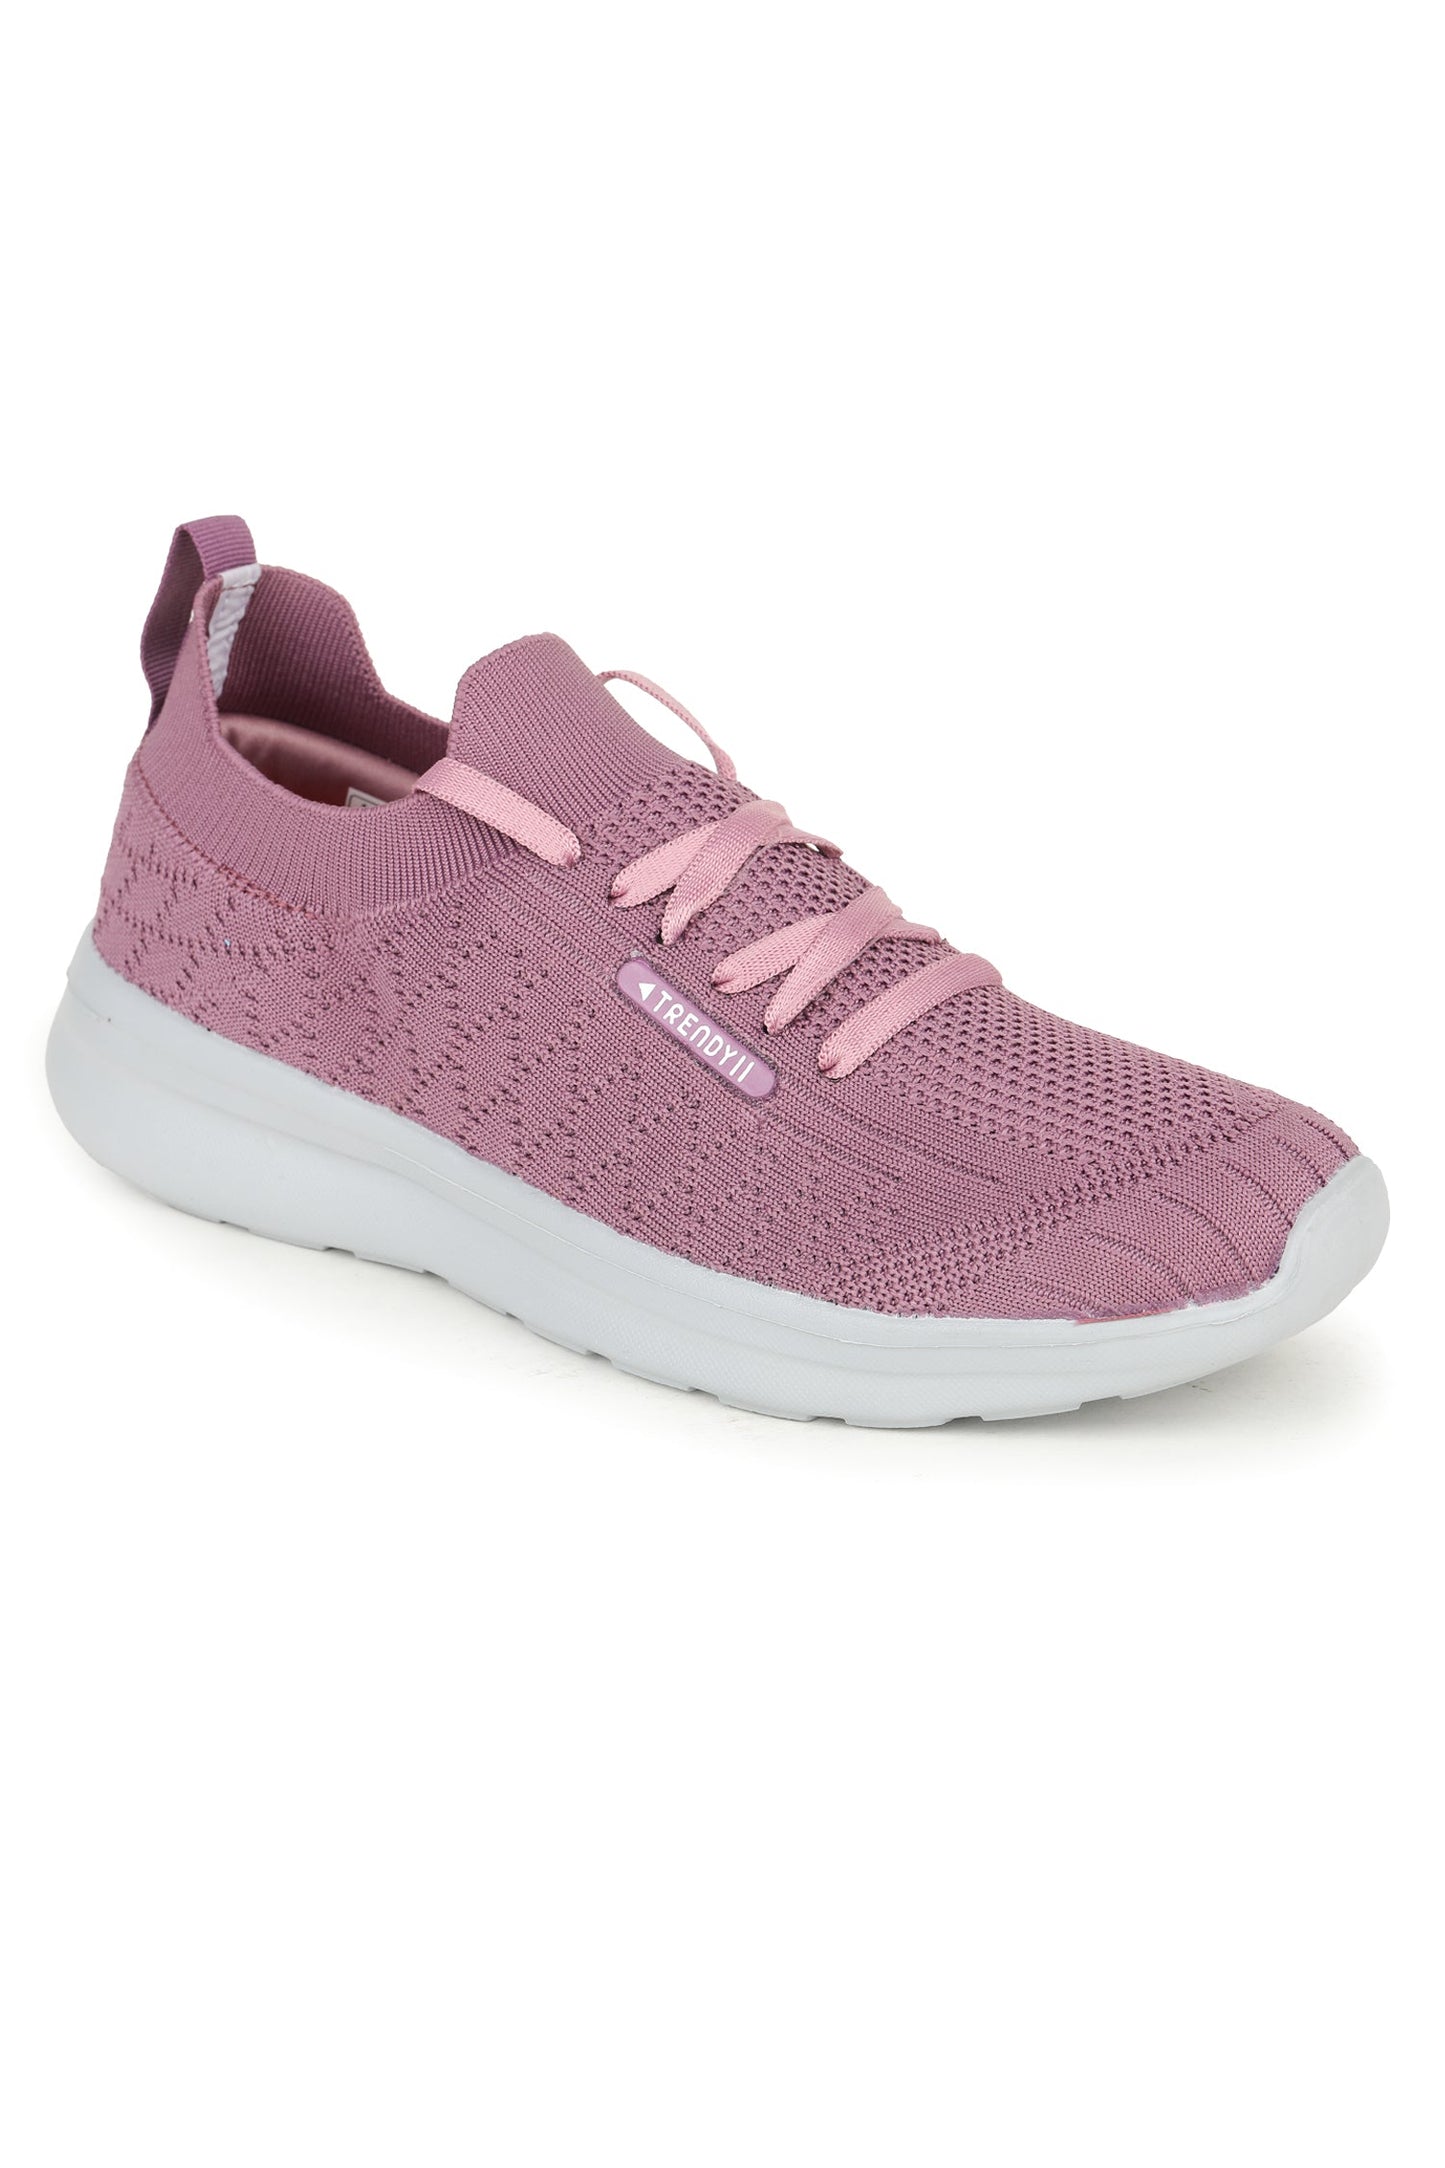 JENNY-N SPORT-SHOES FOR LADIES